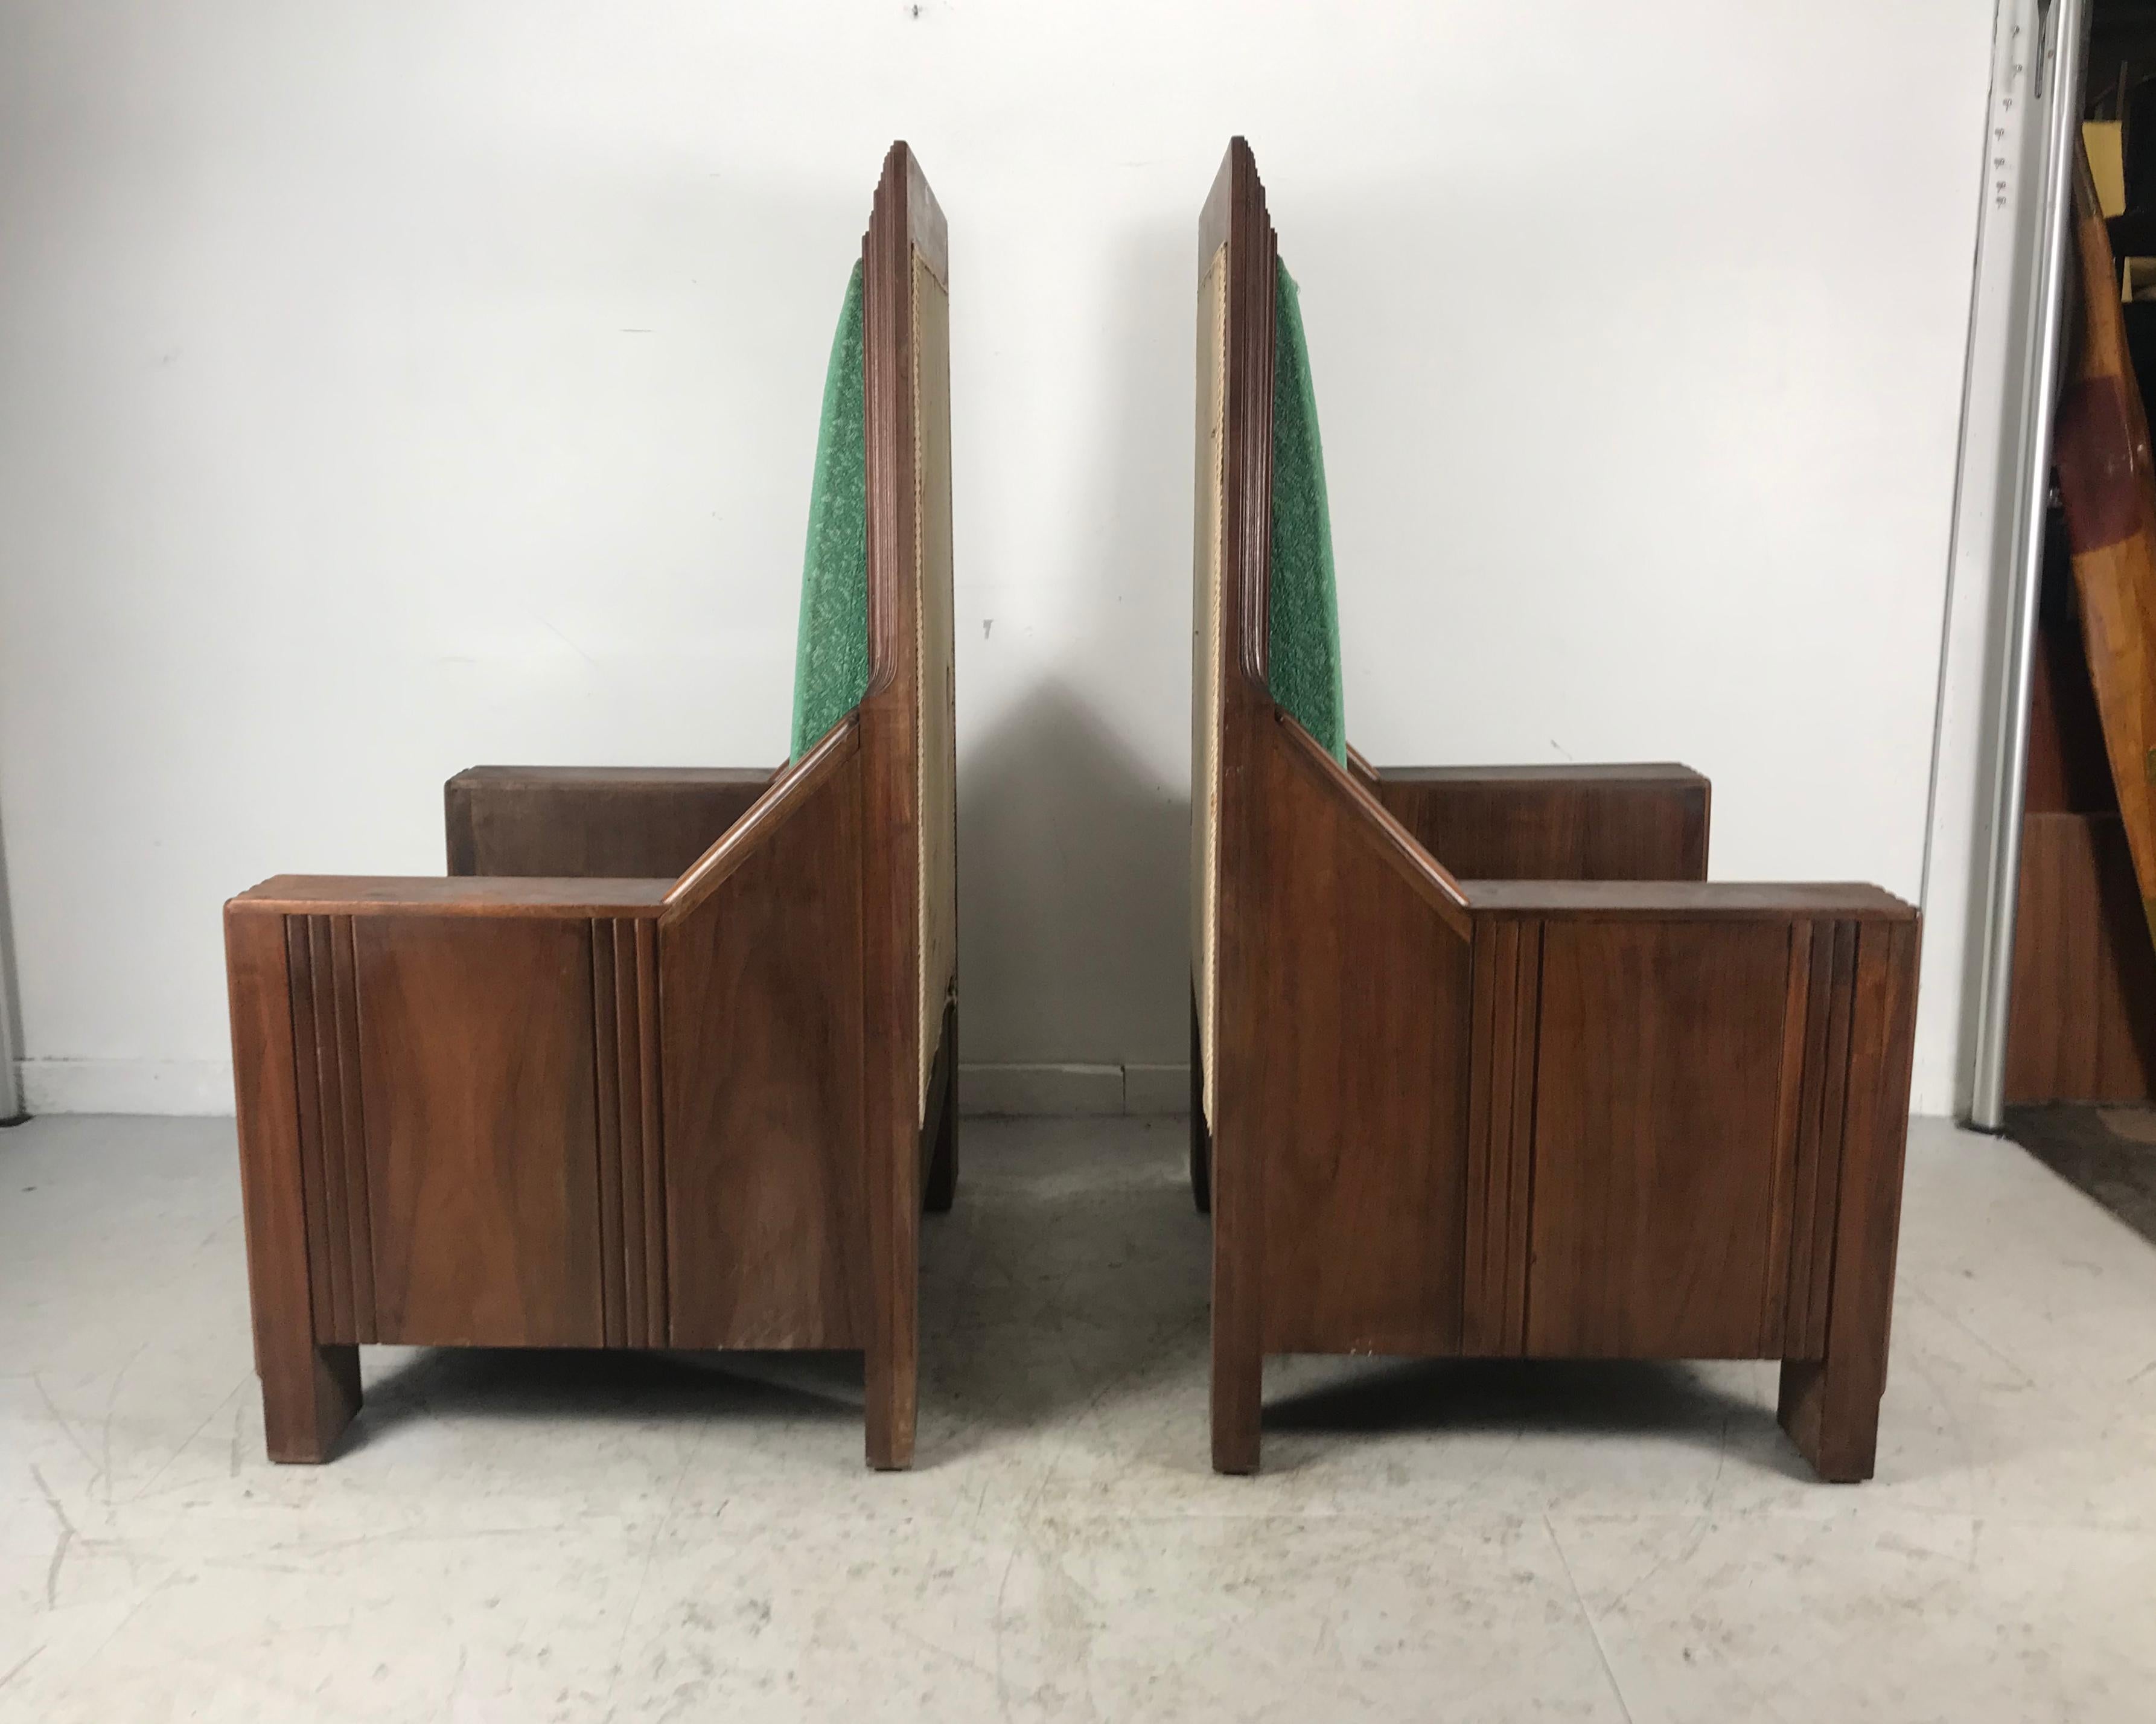 Monumental Art Deco Throne Chairs, Manufactured by the Henderson Ames Co. In Good Condition For Sale In Buffalo, NY